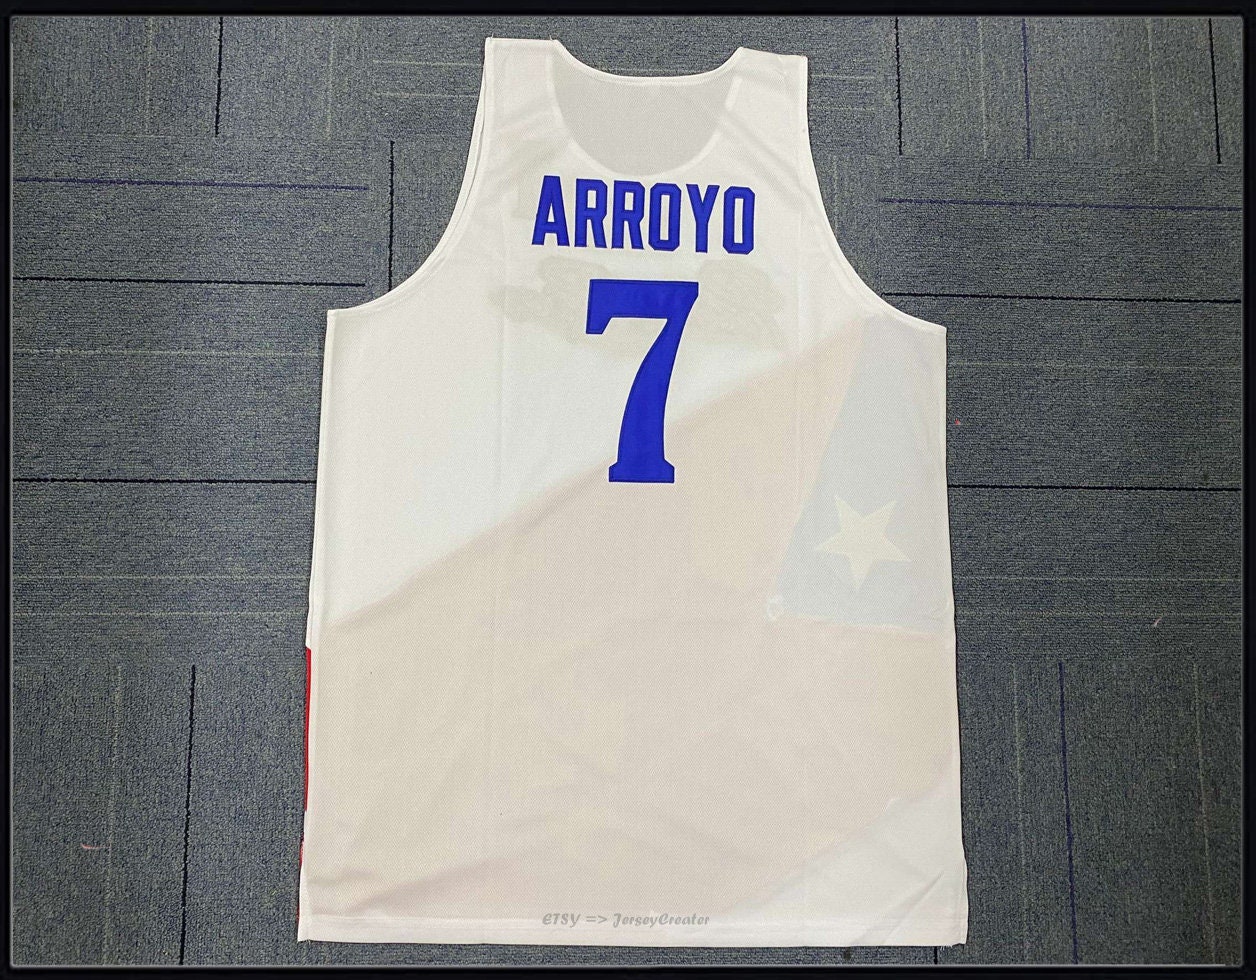 JerseyCreater 2004 Athens Carlos Arroyo #7 Team Puerto Rico Basketball Jerseys Sewn Custom Names;Youth/Adult Size